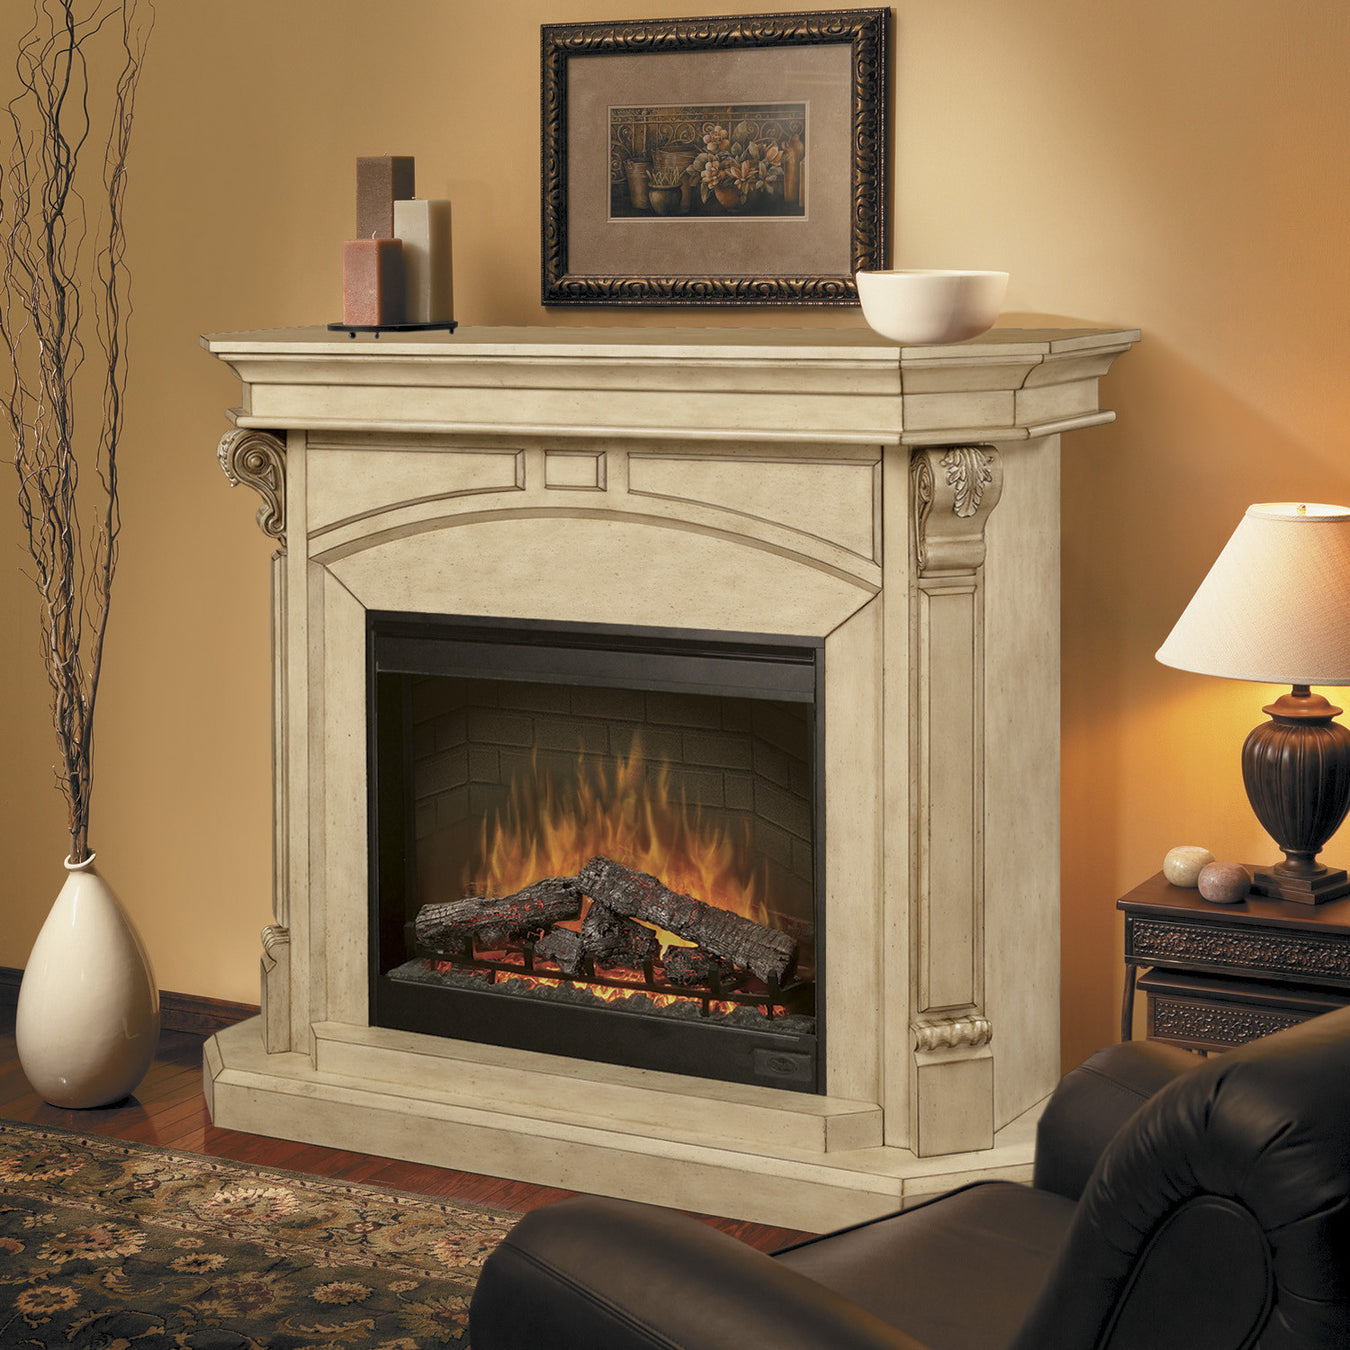 Dimplex Electric Fireplace in Mantels | Dimplex Mantel Collection